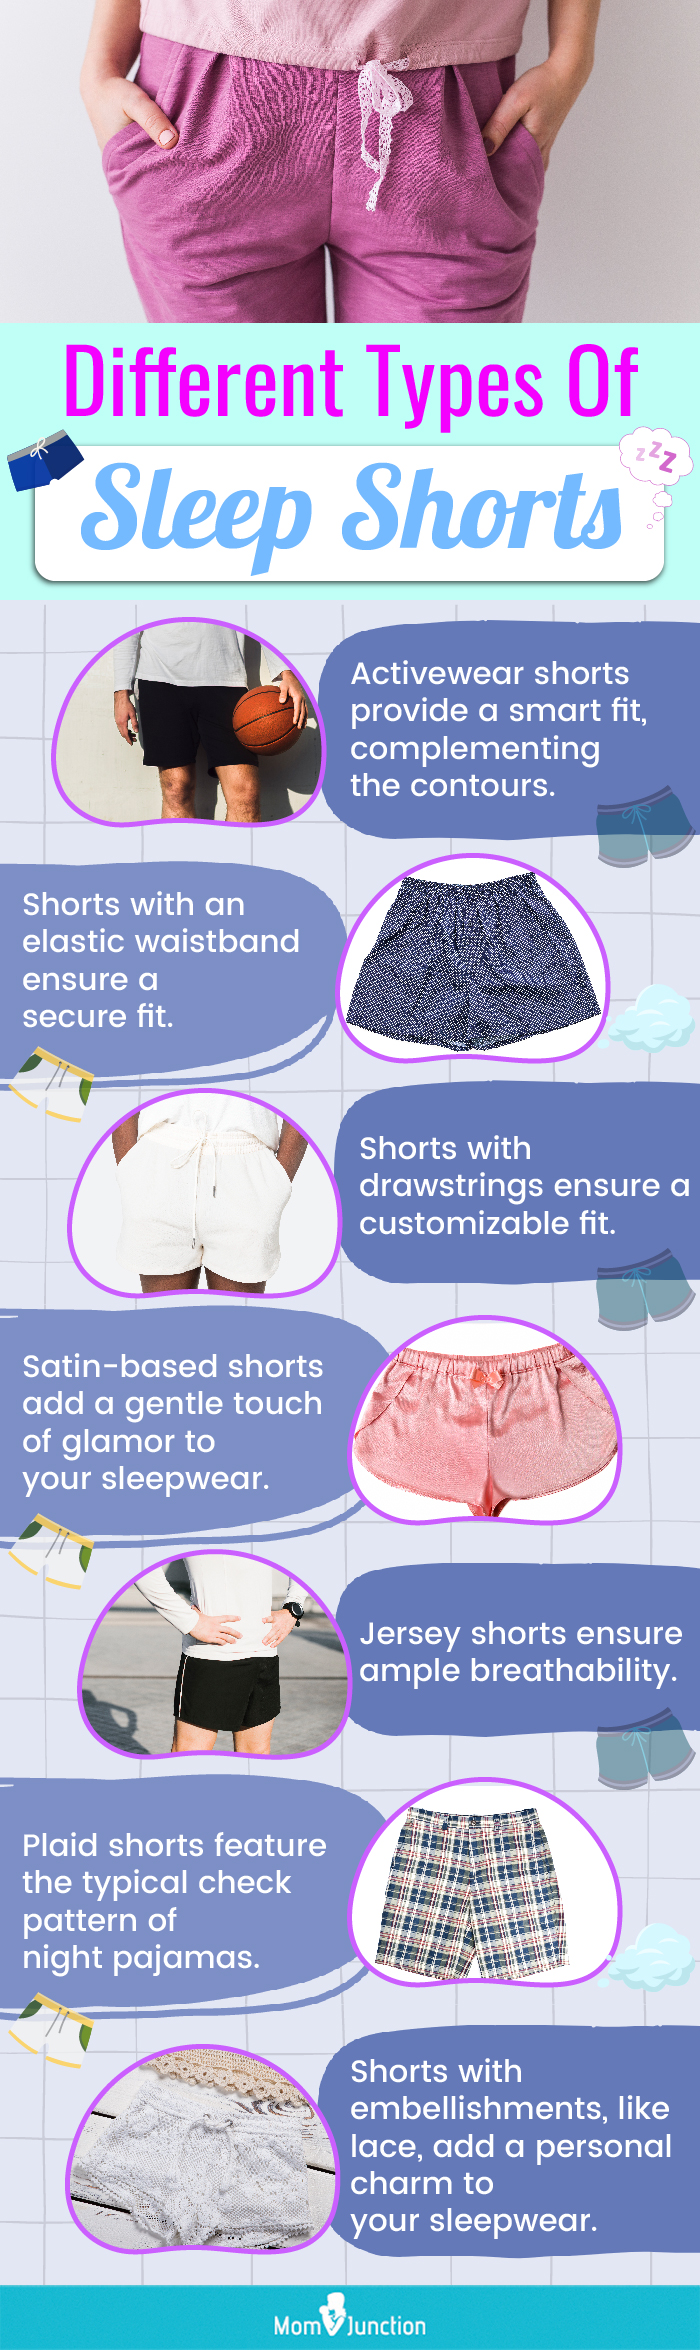 Different Types Of Sleep Shorts (infographic)